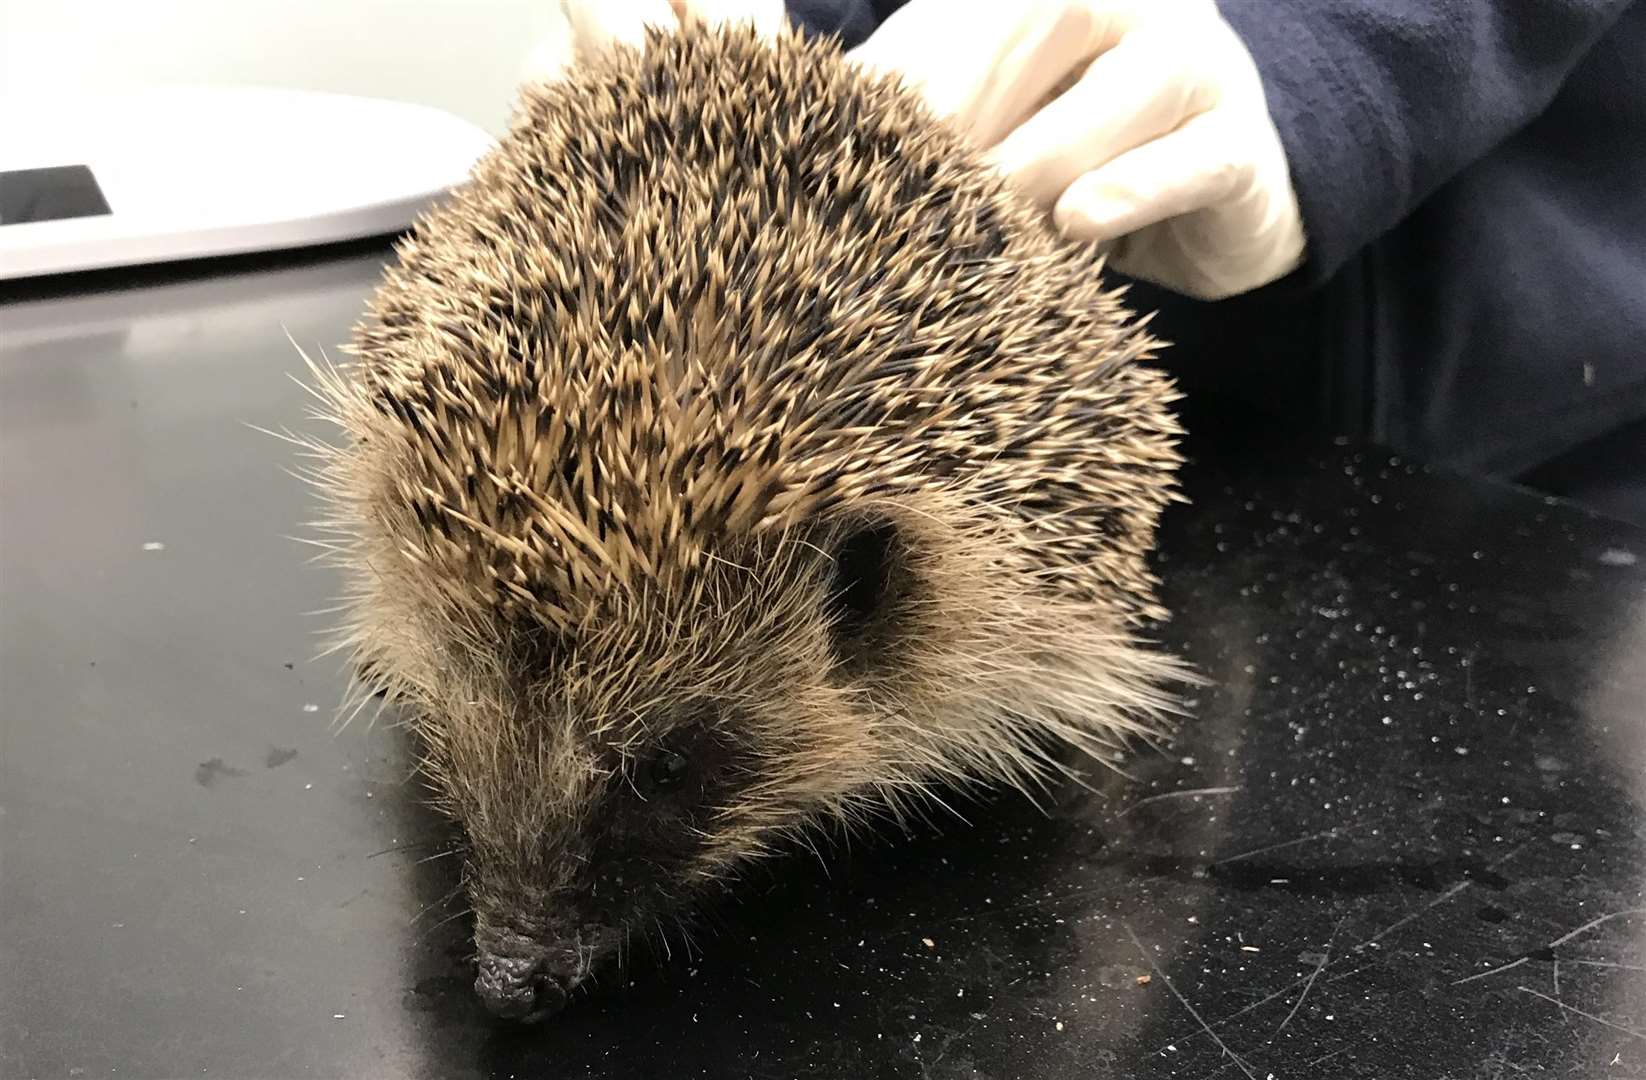 The hedgehog was rescued by a member of the public (5323232)